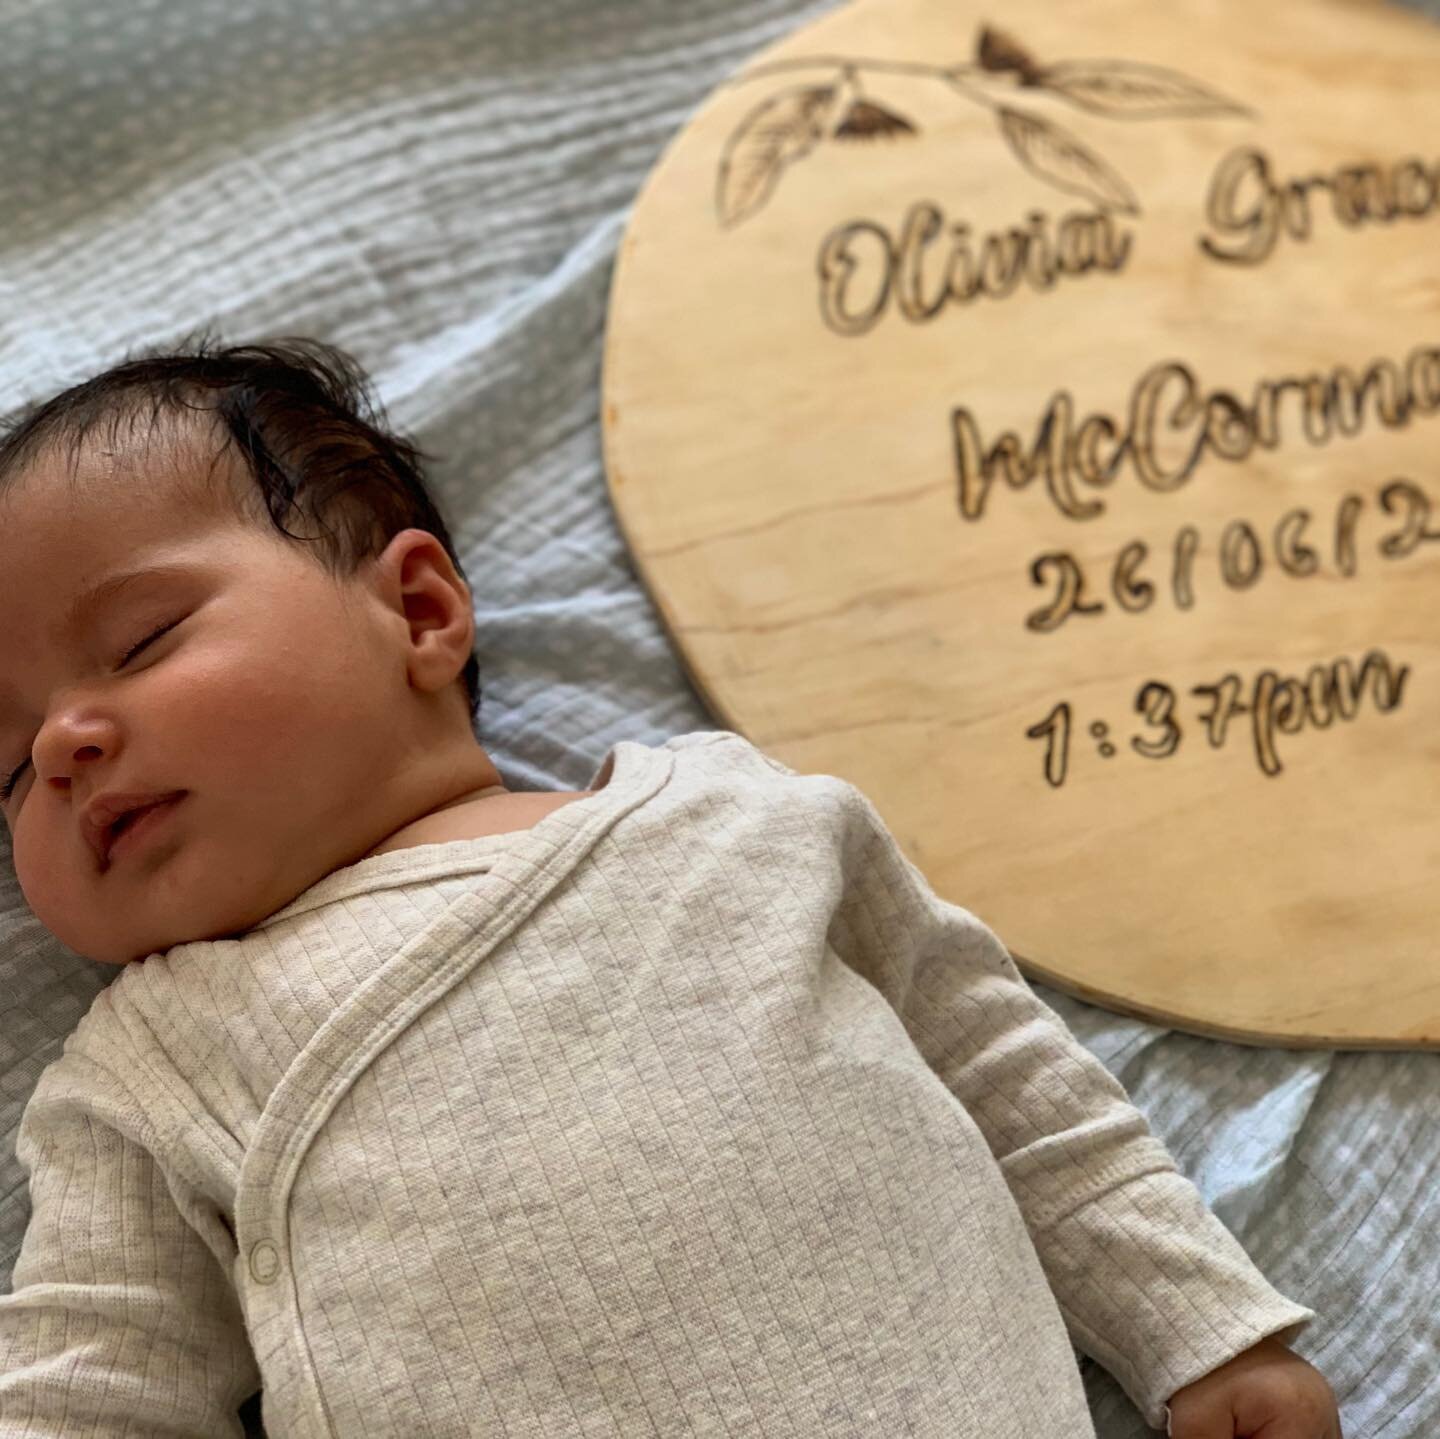 This kiddo has totally stolen my heart and my world 😍 9 weeks old already! Don&rsquo;t grow up too fast my girl. 

Thanks for the beautiful hand-burned baby birth board @wildwood_collections 💗